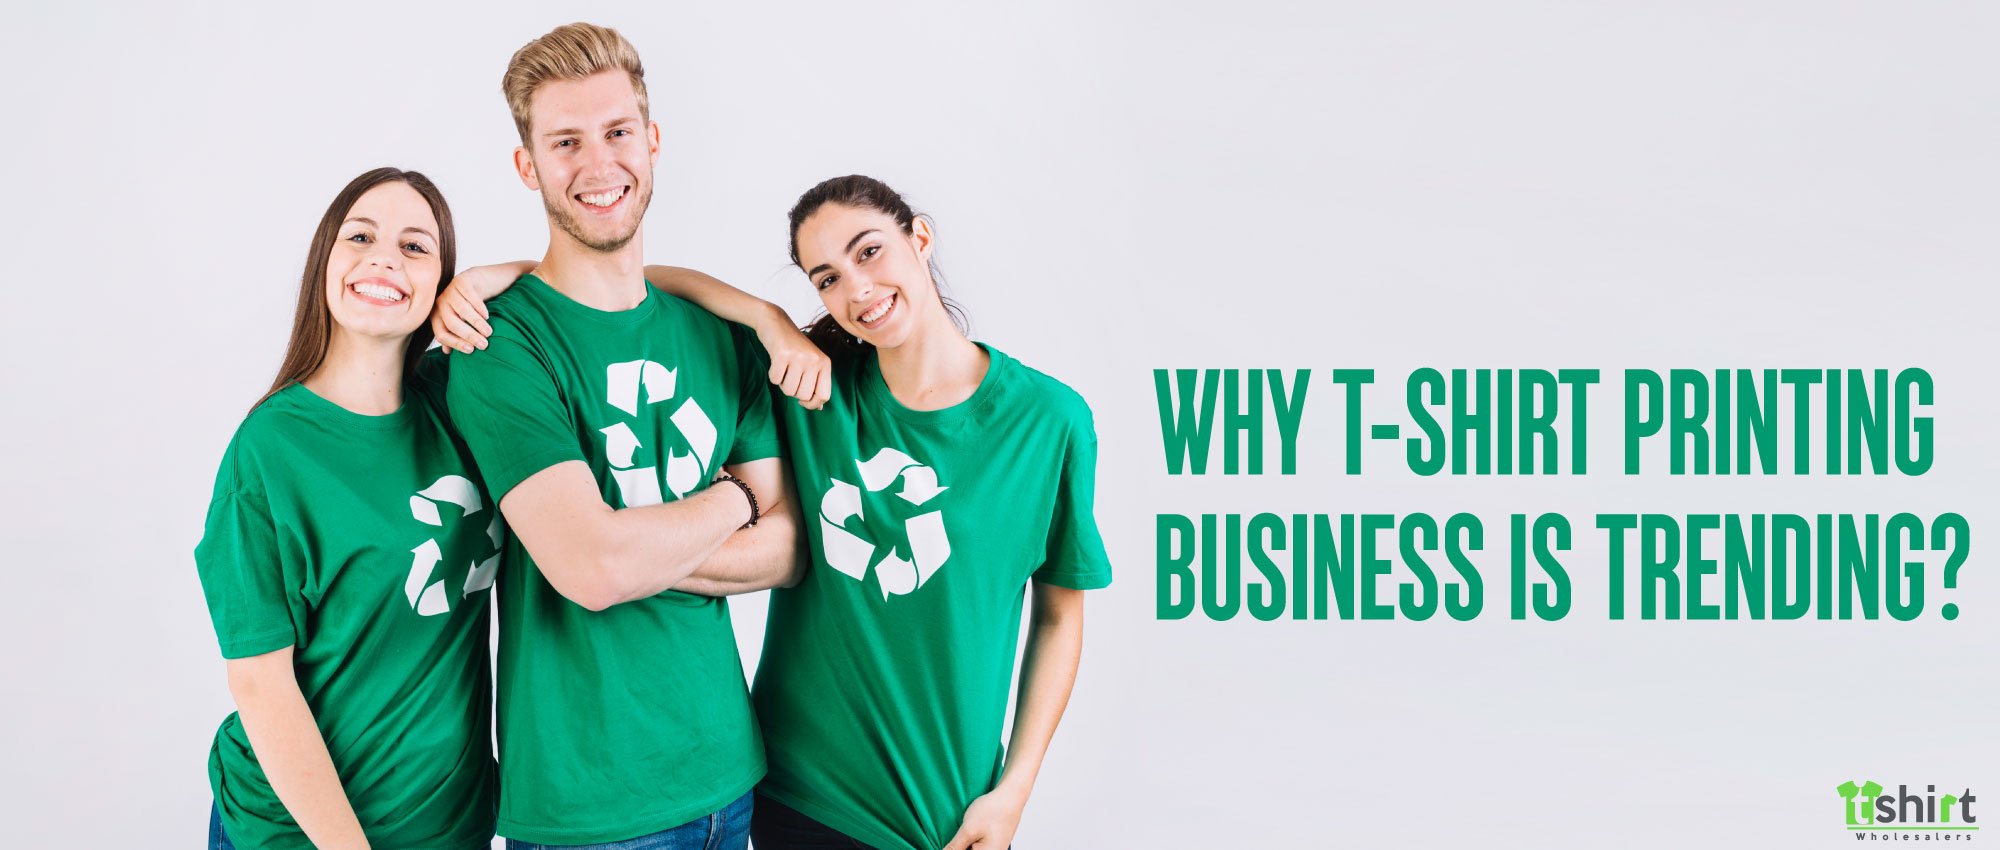 WHY T-SHIRT PRINTING BUSINESS IS TRENDING?